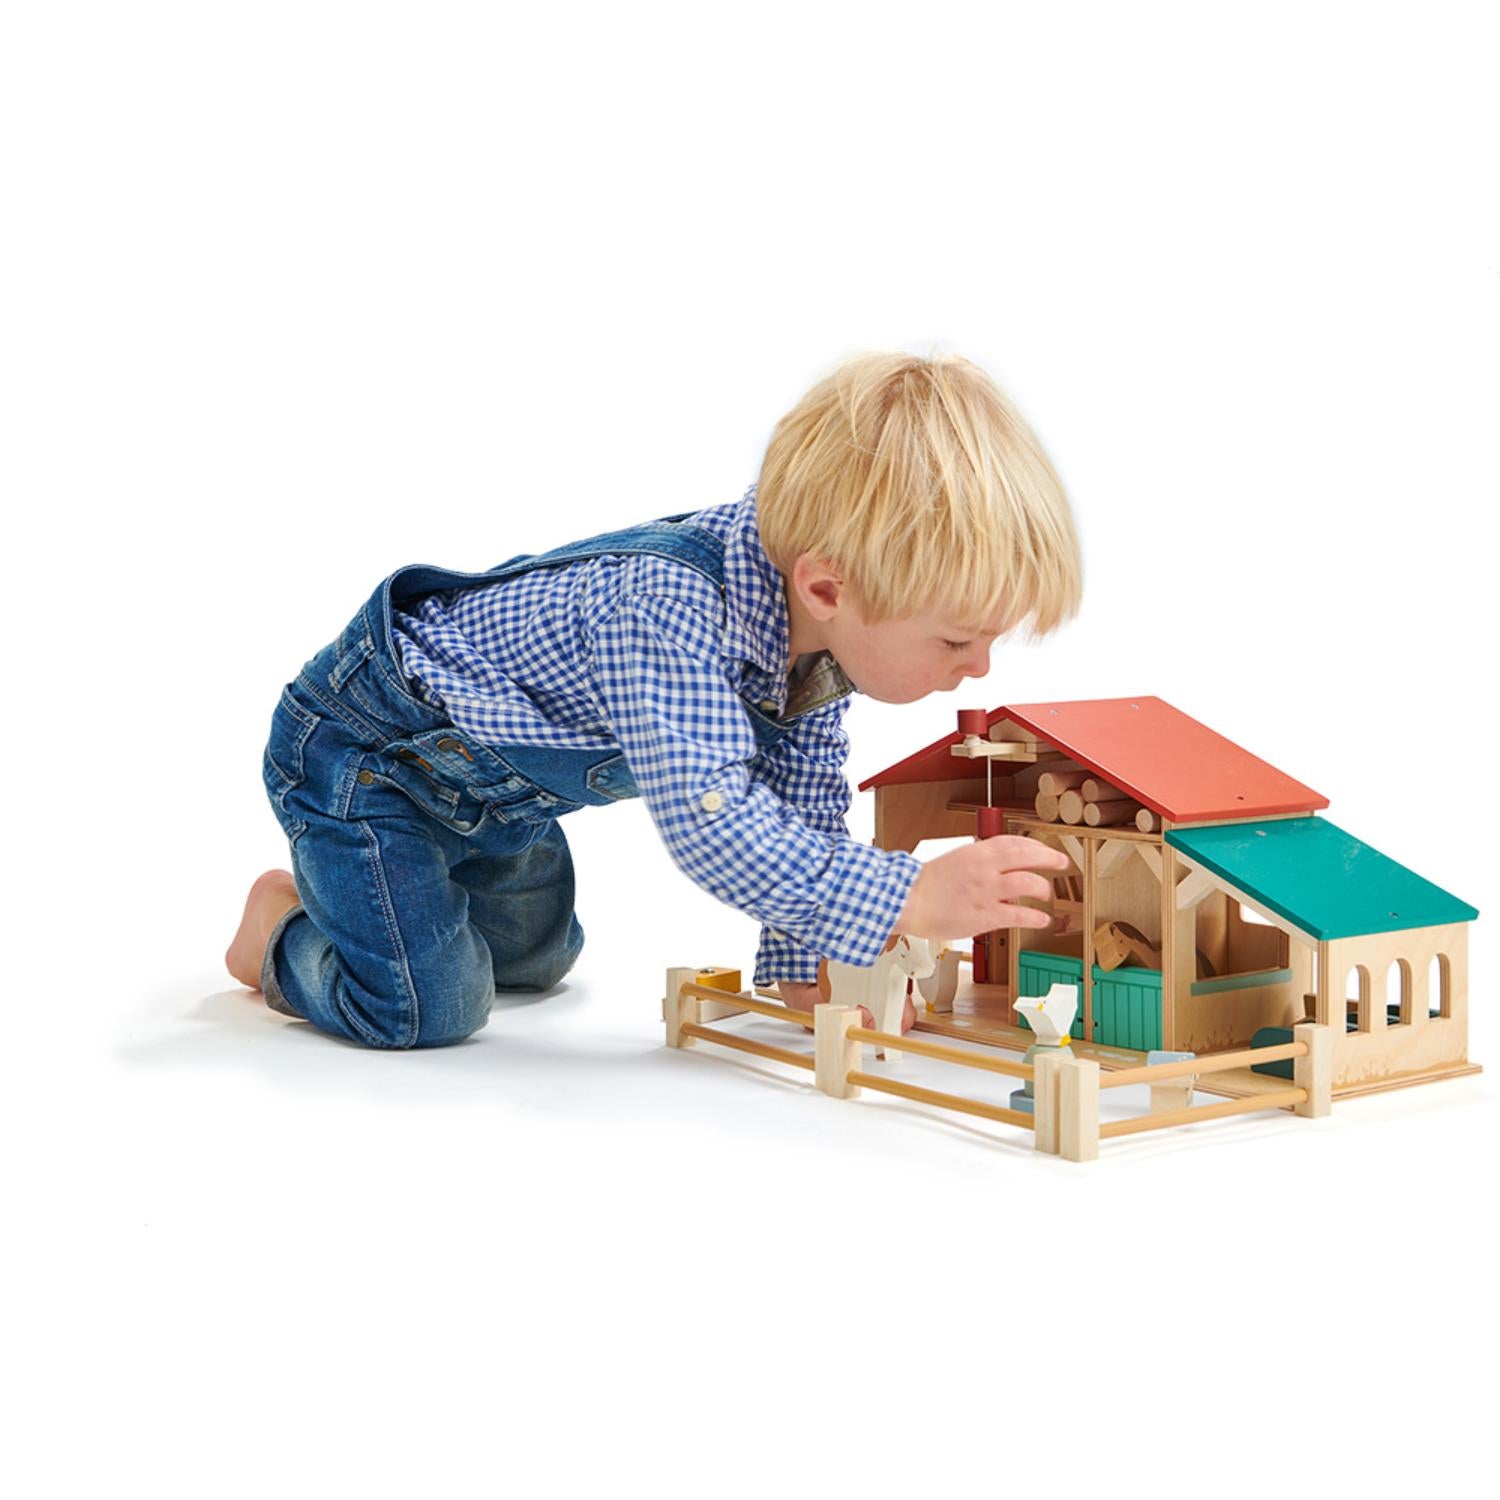 Wooden Farm Toy Play Set For